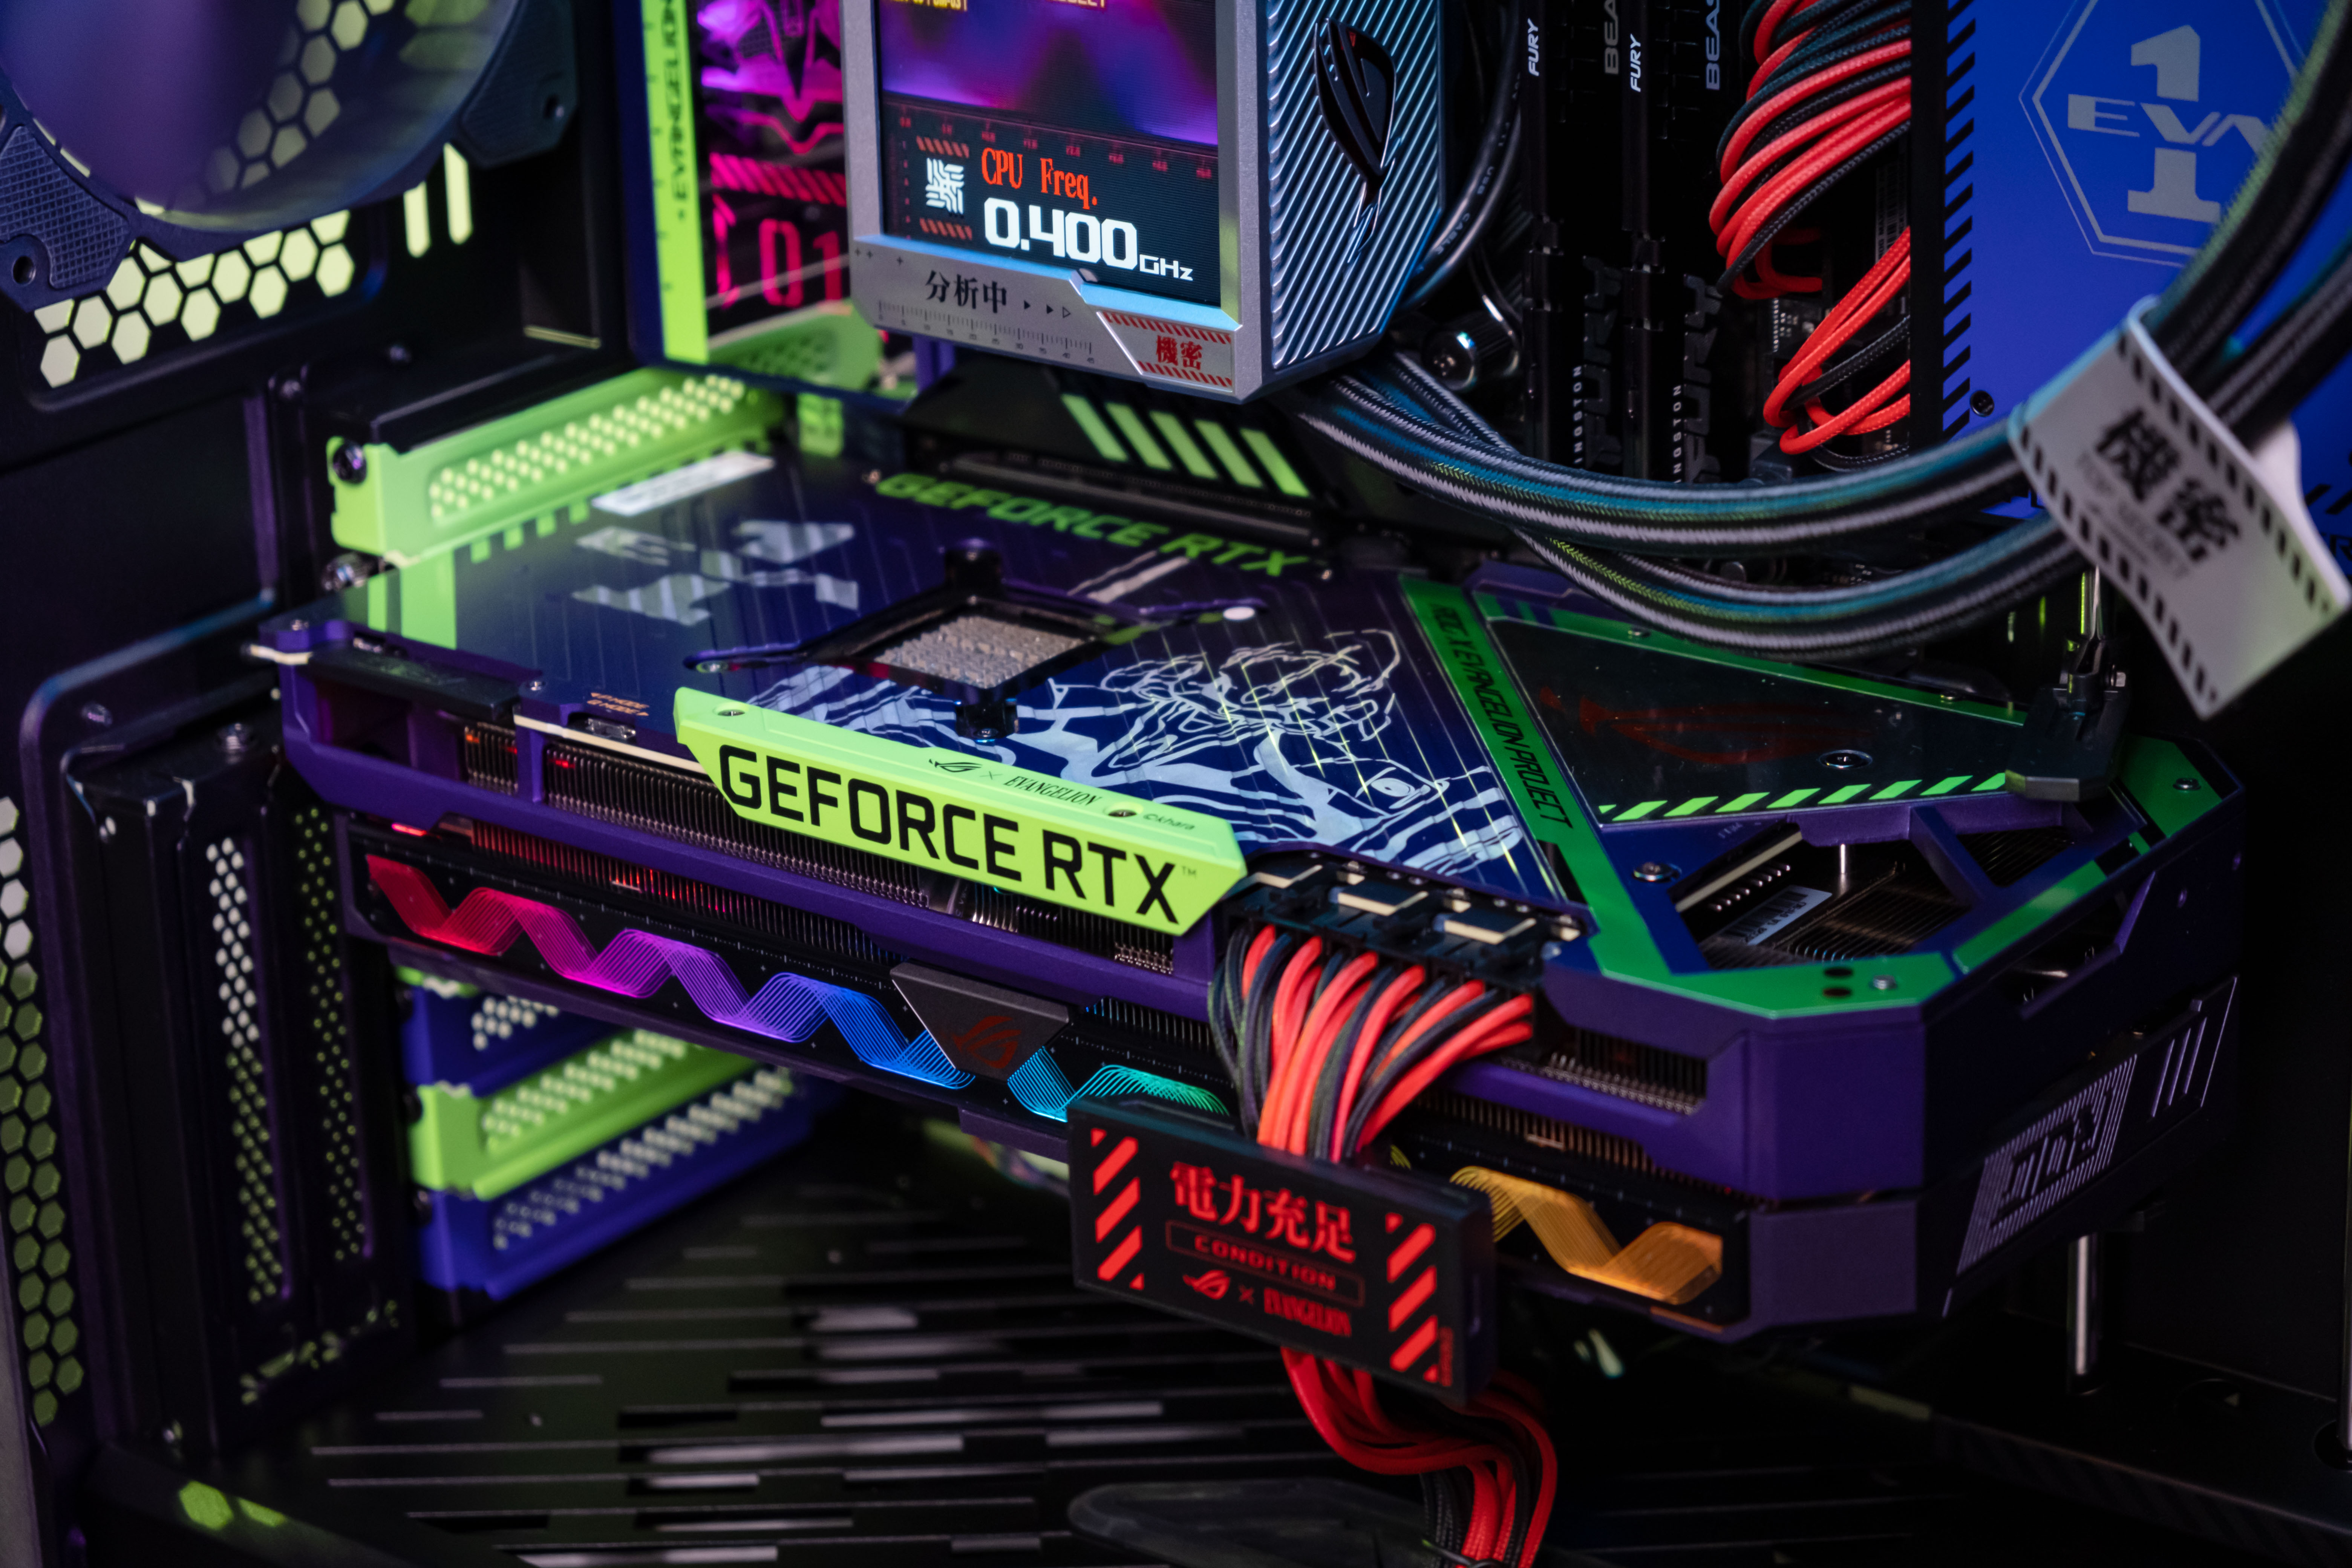 Republic Of Gamers ASUS PC Build PC Cases Evangelion Unit 01 Water Cooling Crossover GPU 6240x4160